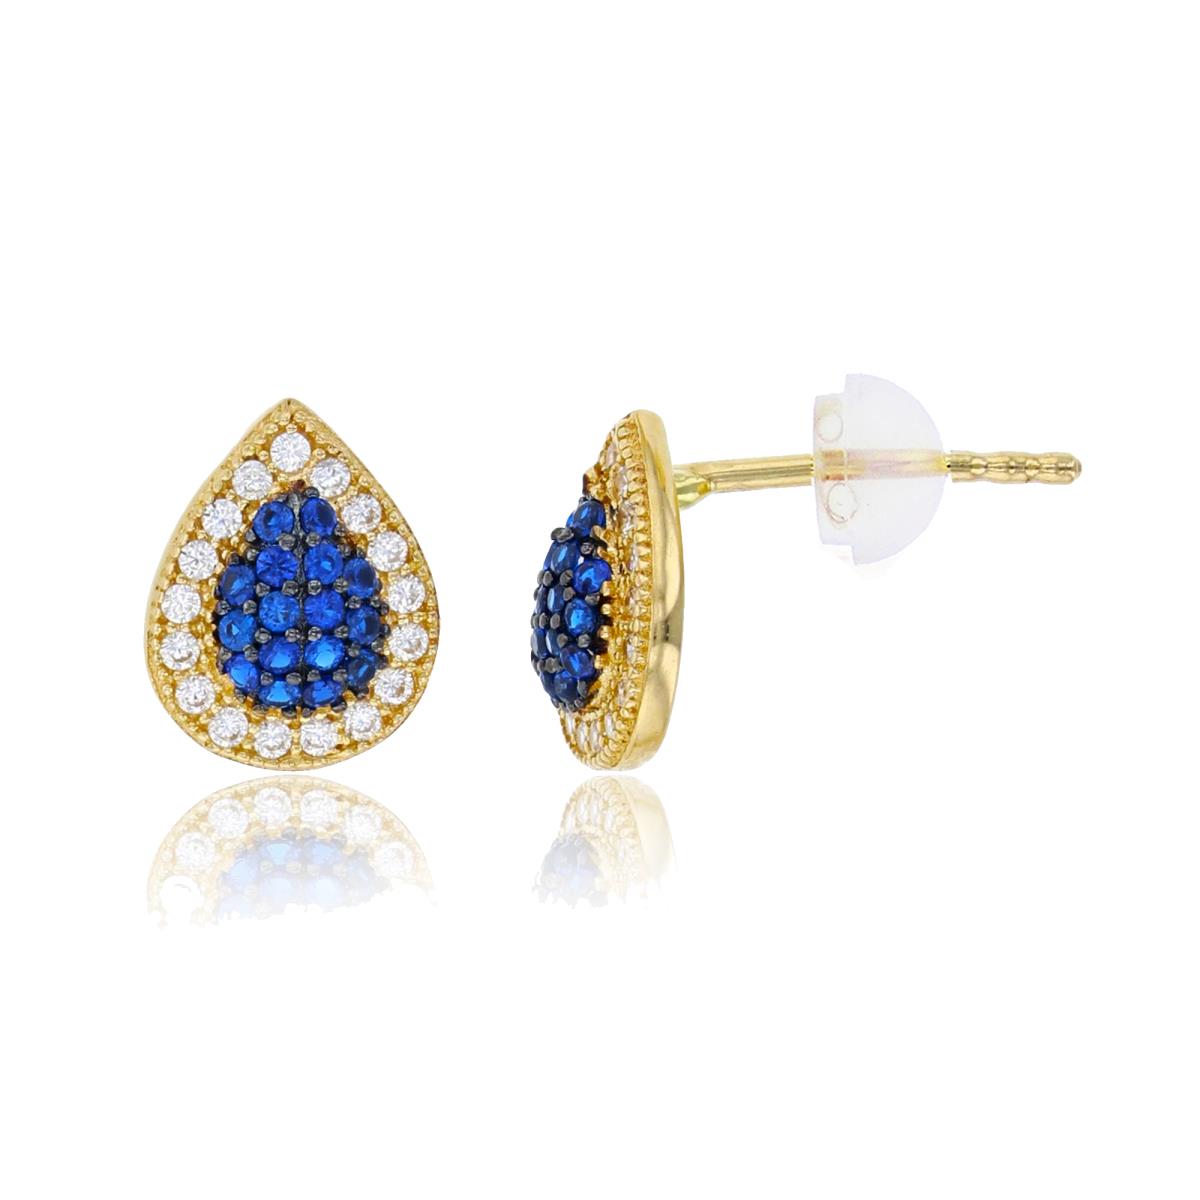 10K Yellow Gold 9x8mm Micropave Sapphire & White CZ Domed Pear-Shaped Stud Earring with Silicone Back